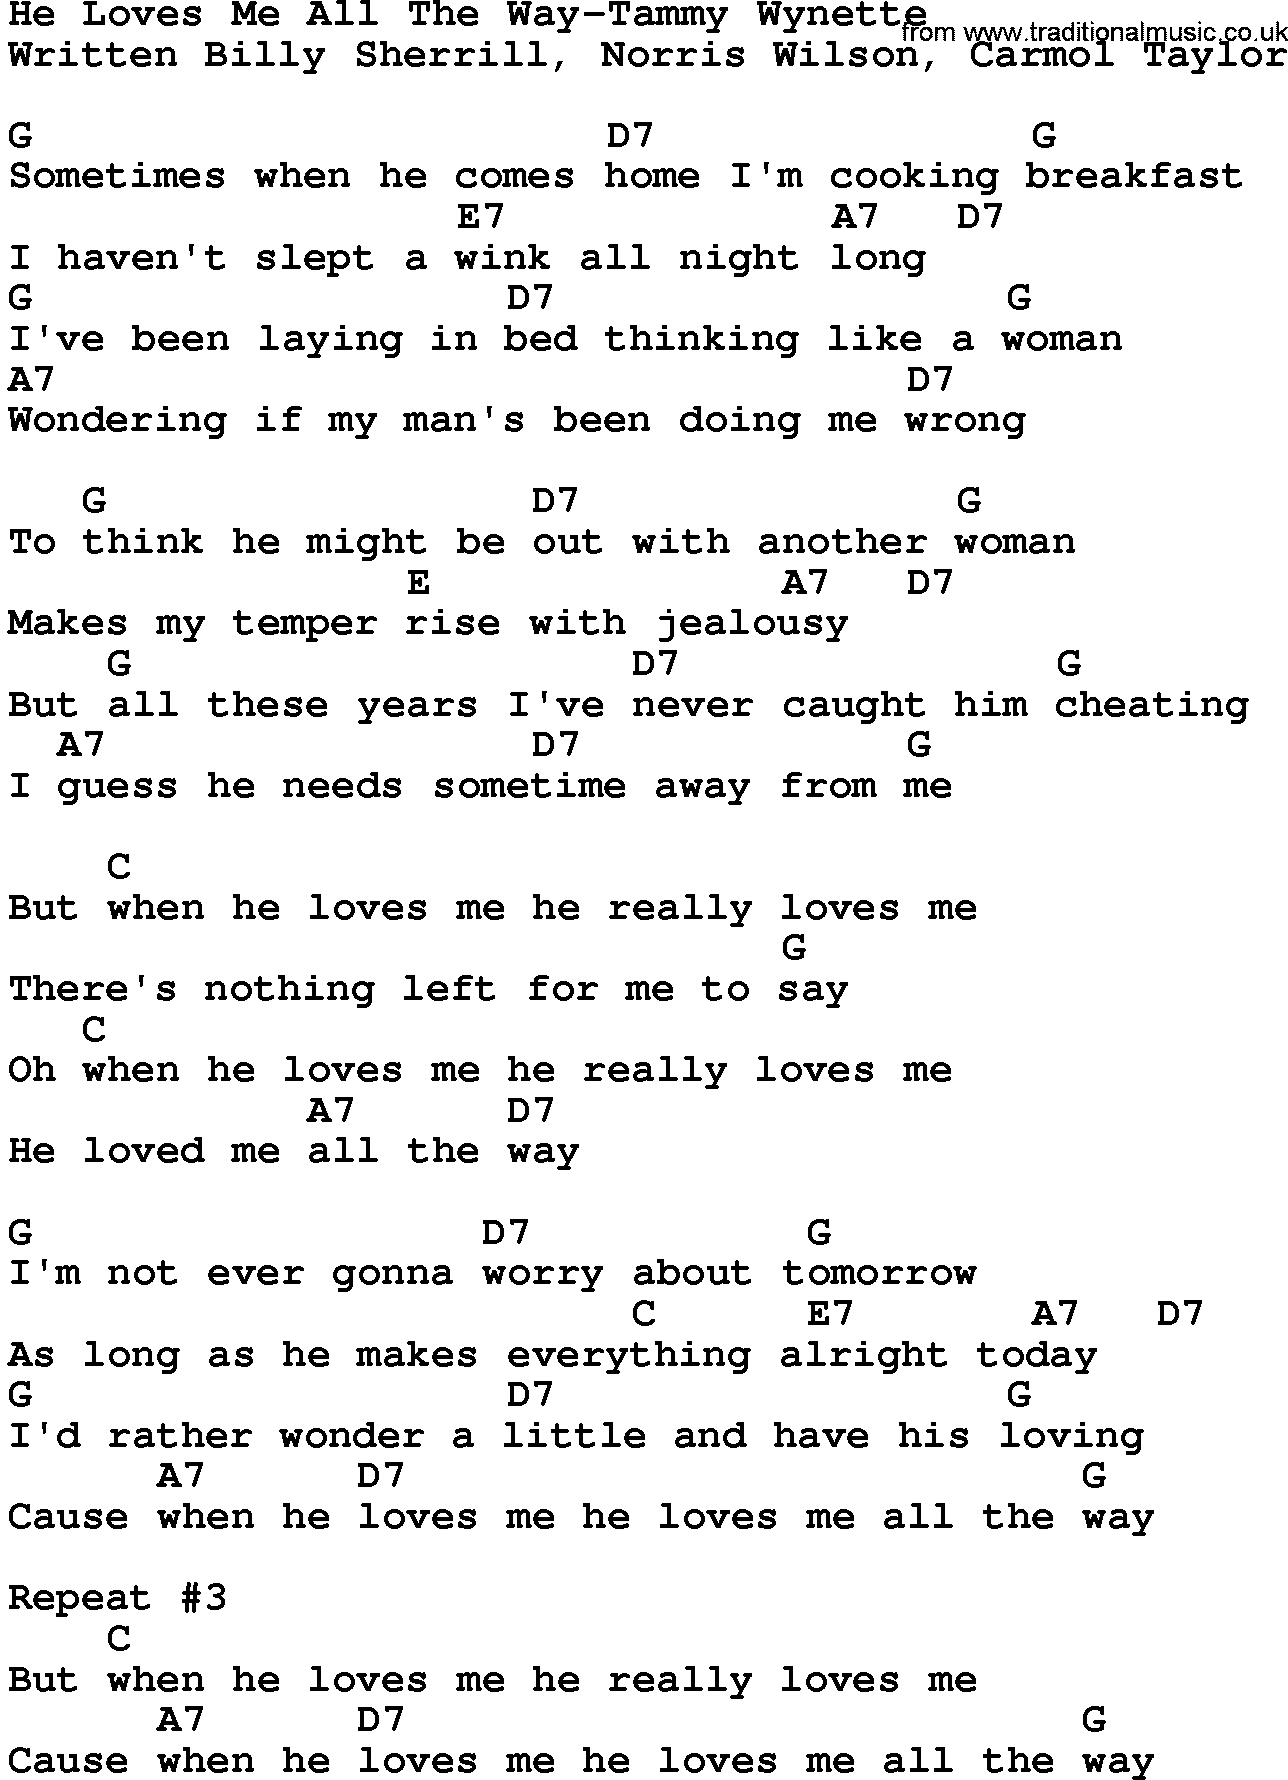 Country music song: He Loves Me All The Way-Tammy Wynette lyrics and chords